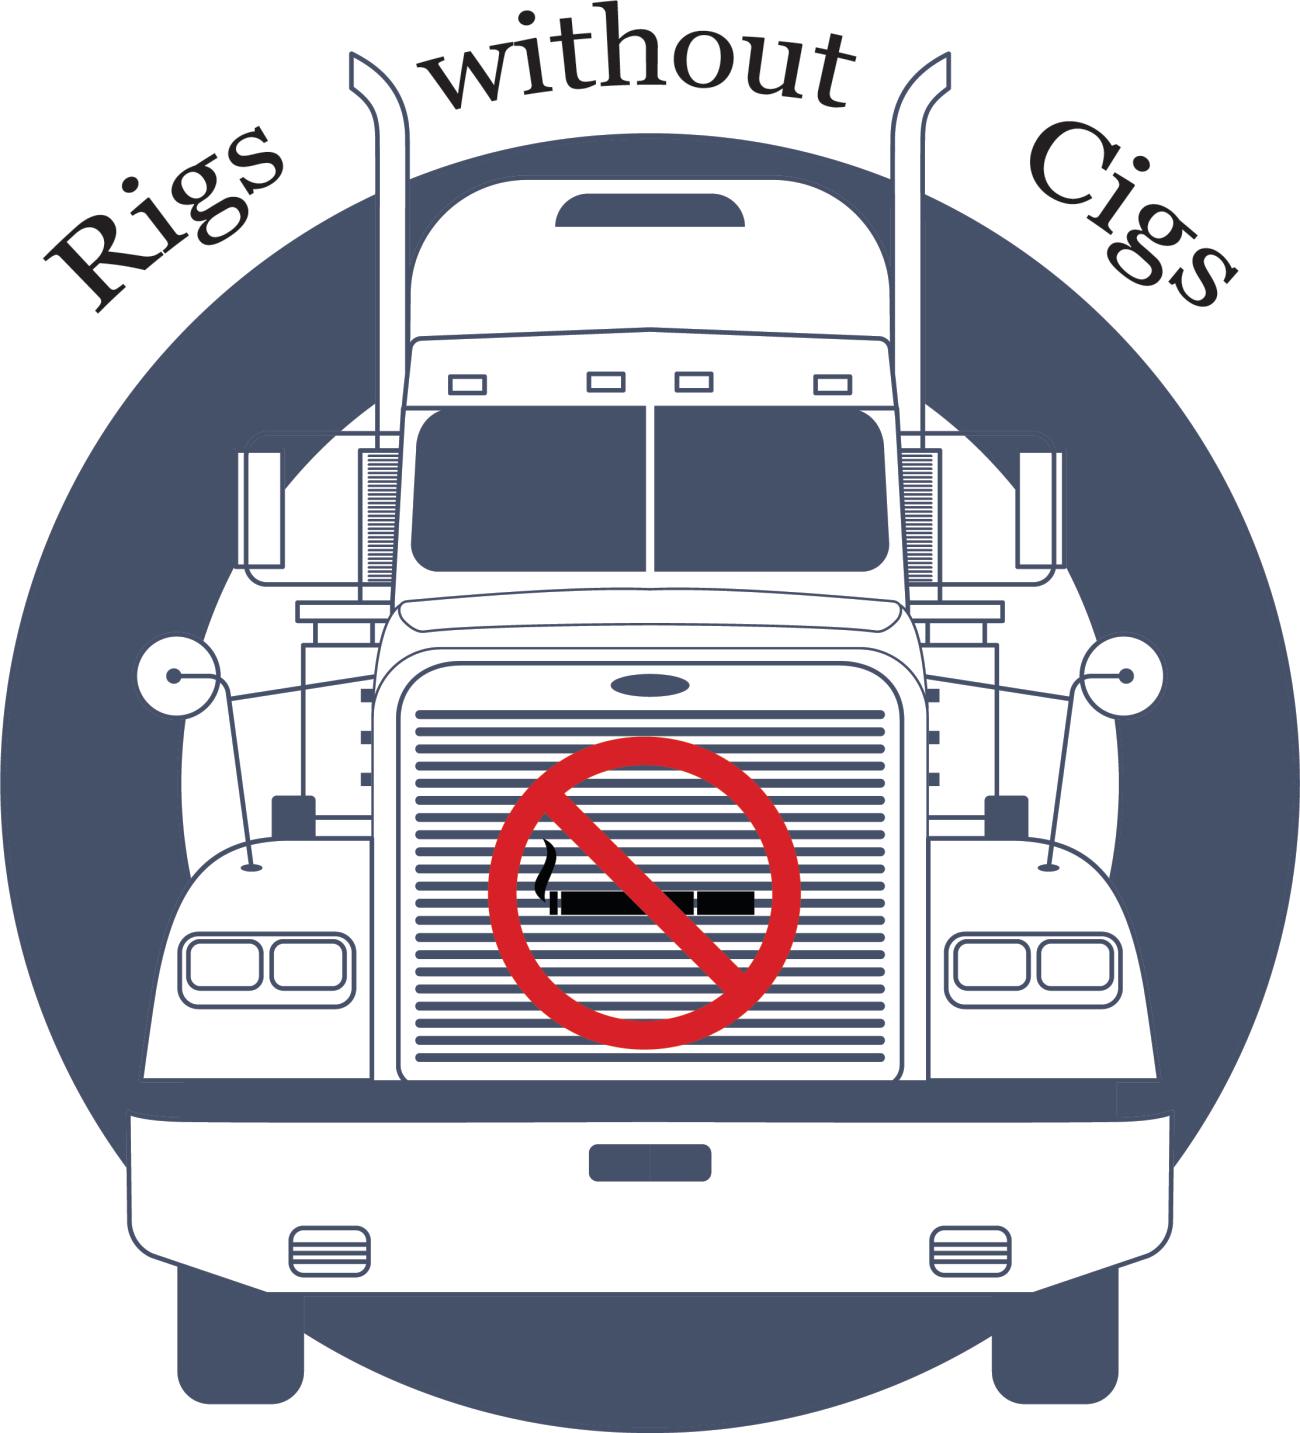 Rigs without Cigs - The Highway to a Tobacco Free Life